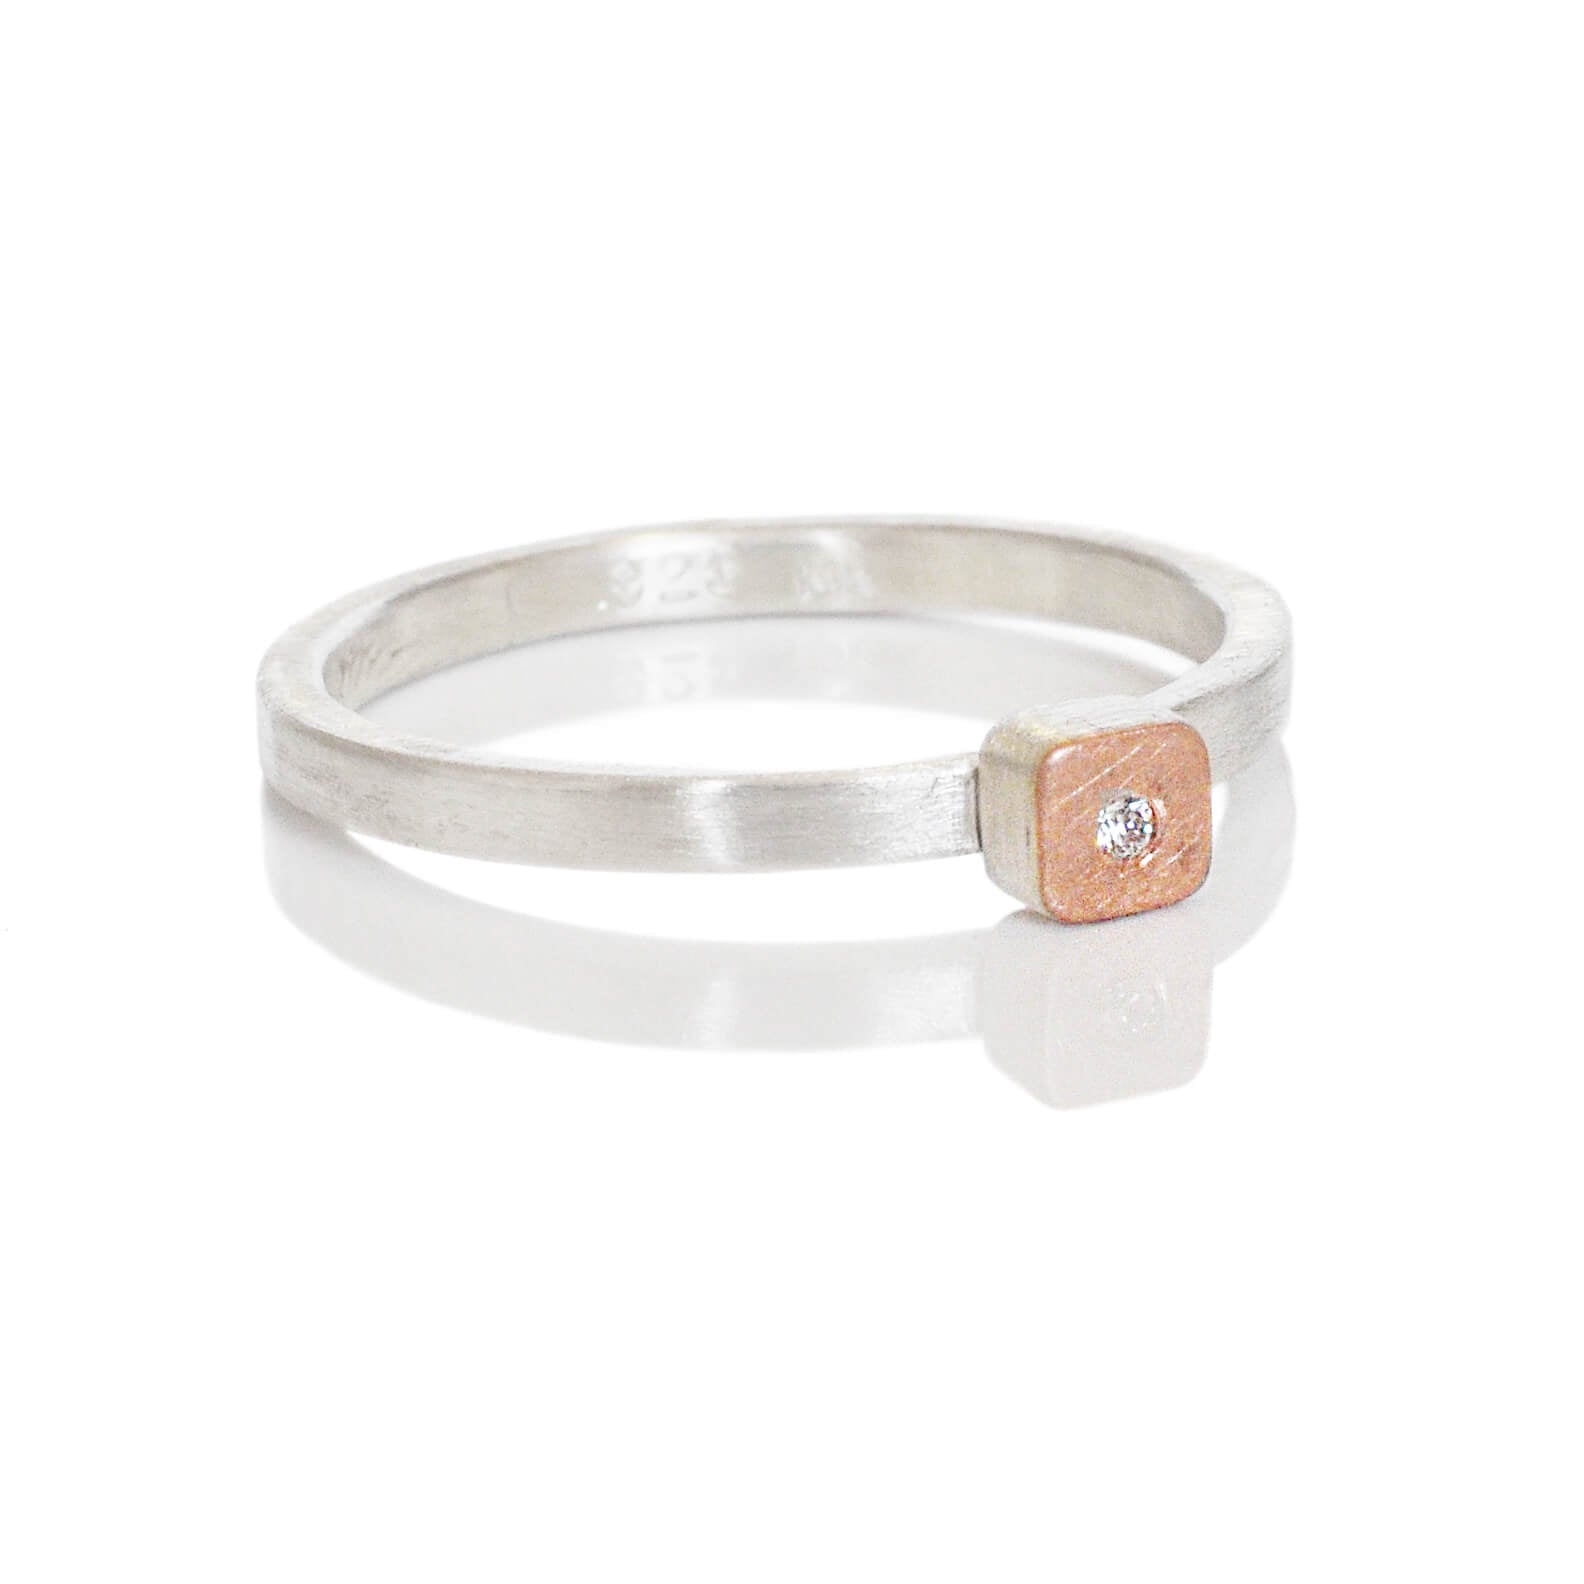 Sterling silver ring with square cell of red gold and a flush set diamond. Handmade by EC Design Jewelry in Minneapolis, MN using recycled metal and conflict-free stone.